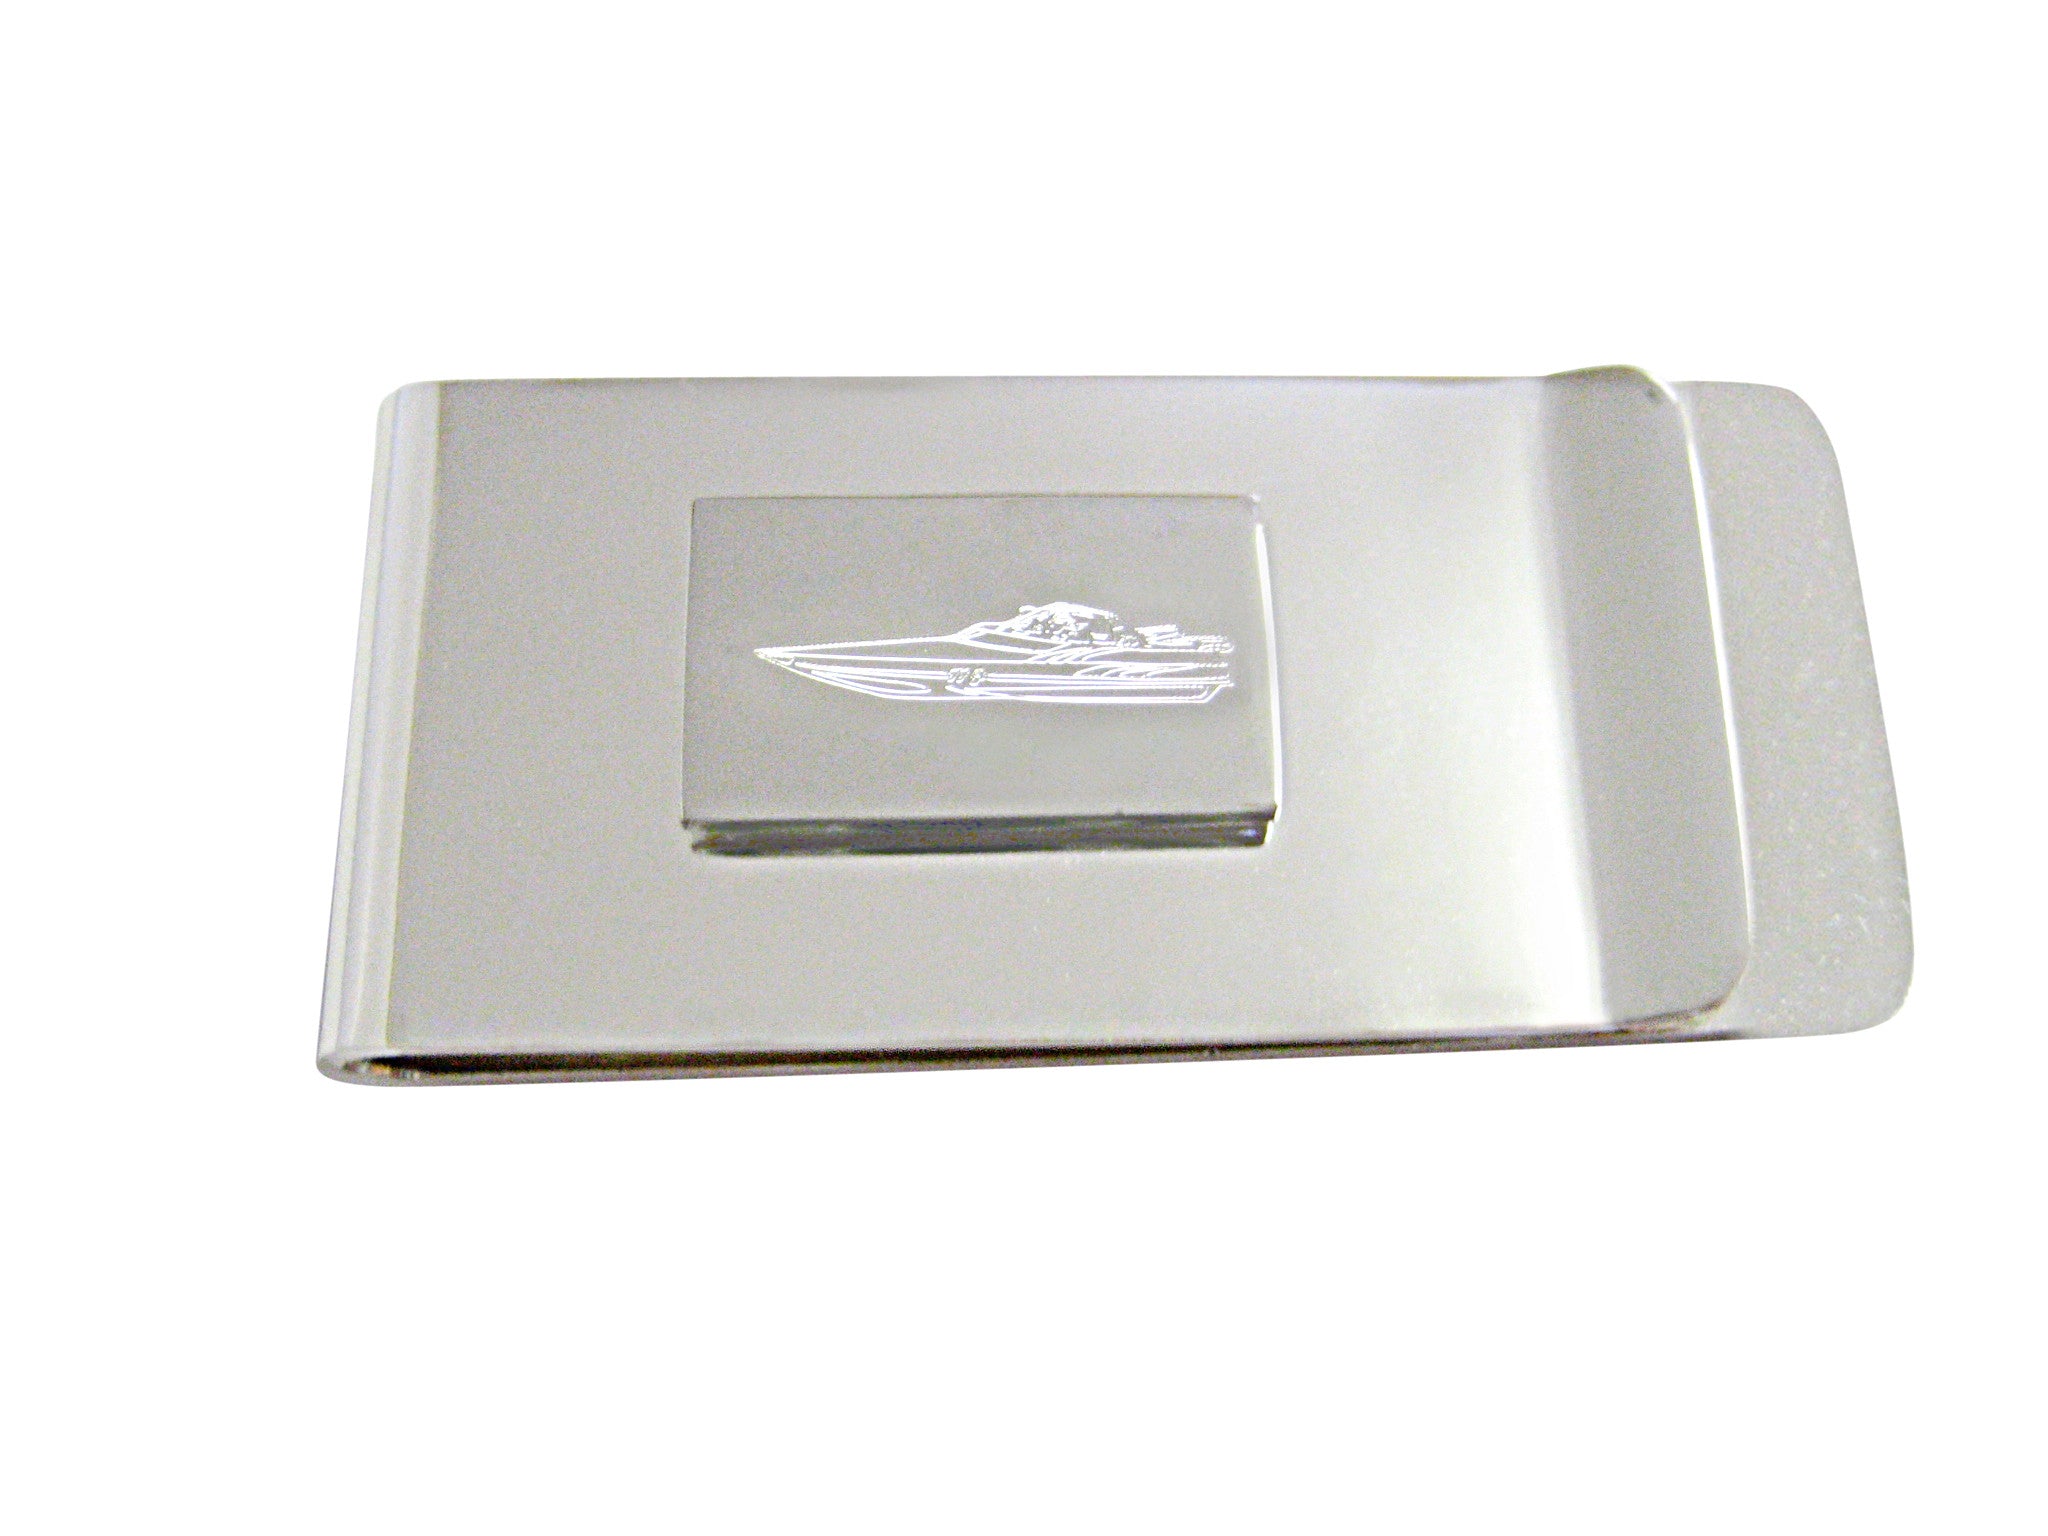 Silver Toned Etched Speed Boat Money Clip